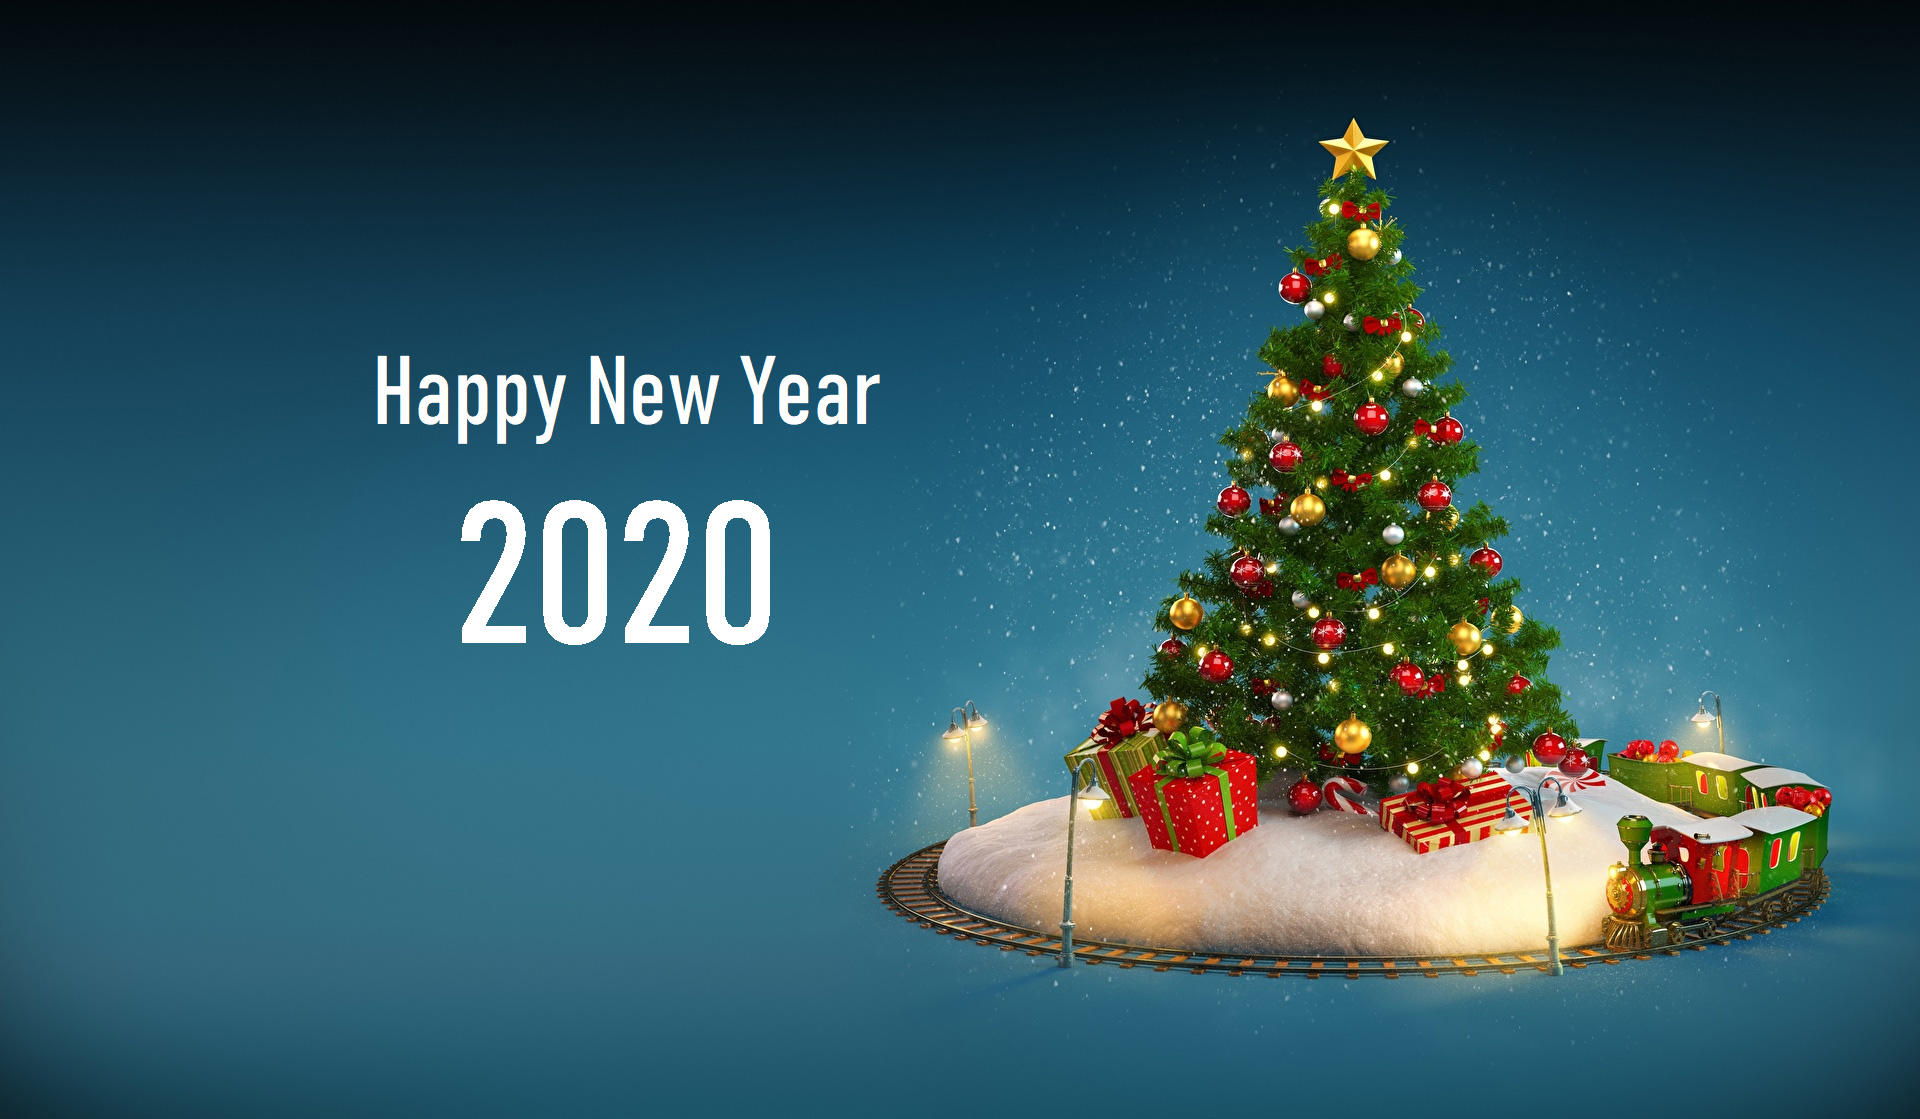 Photo Merry Christmas And Happy New Year 2020 Number - Happy New Year 2020 And Merry Christmas - HD Wallpaper 